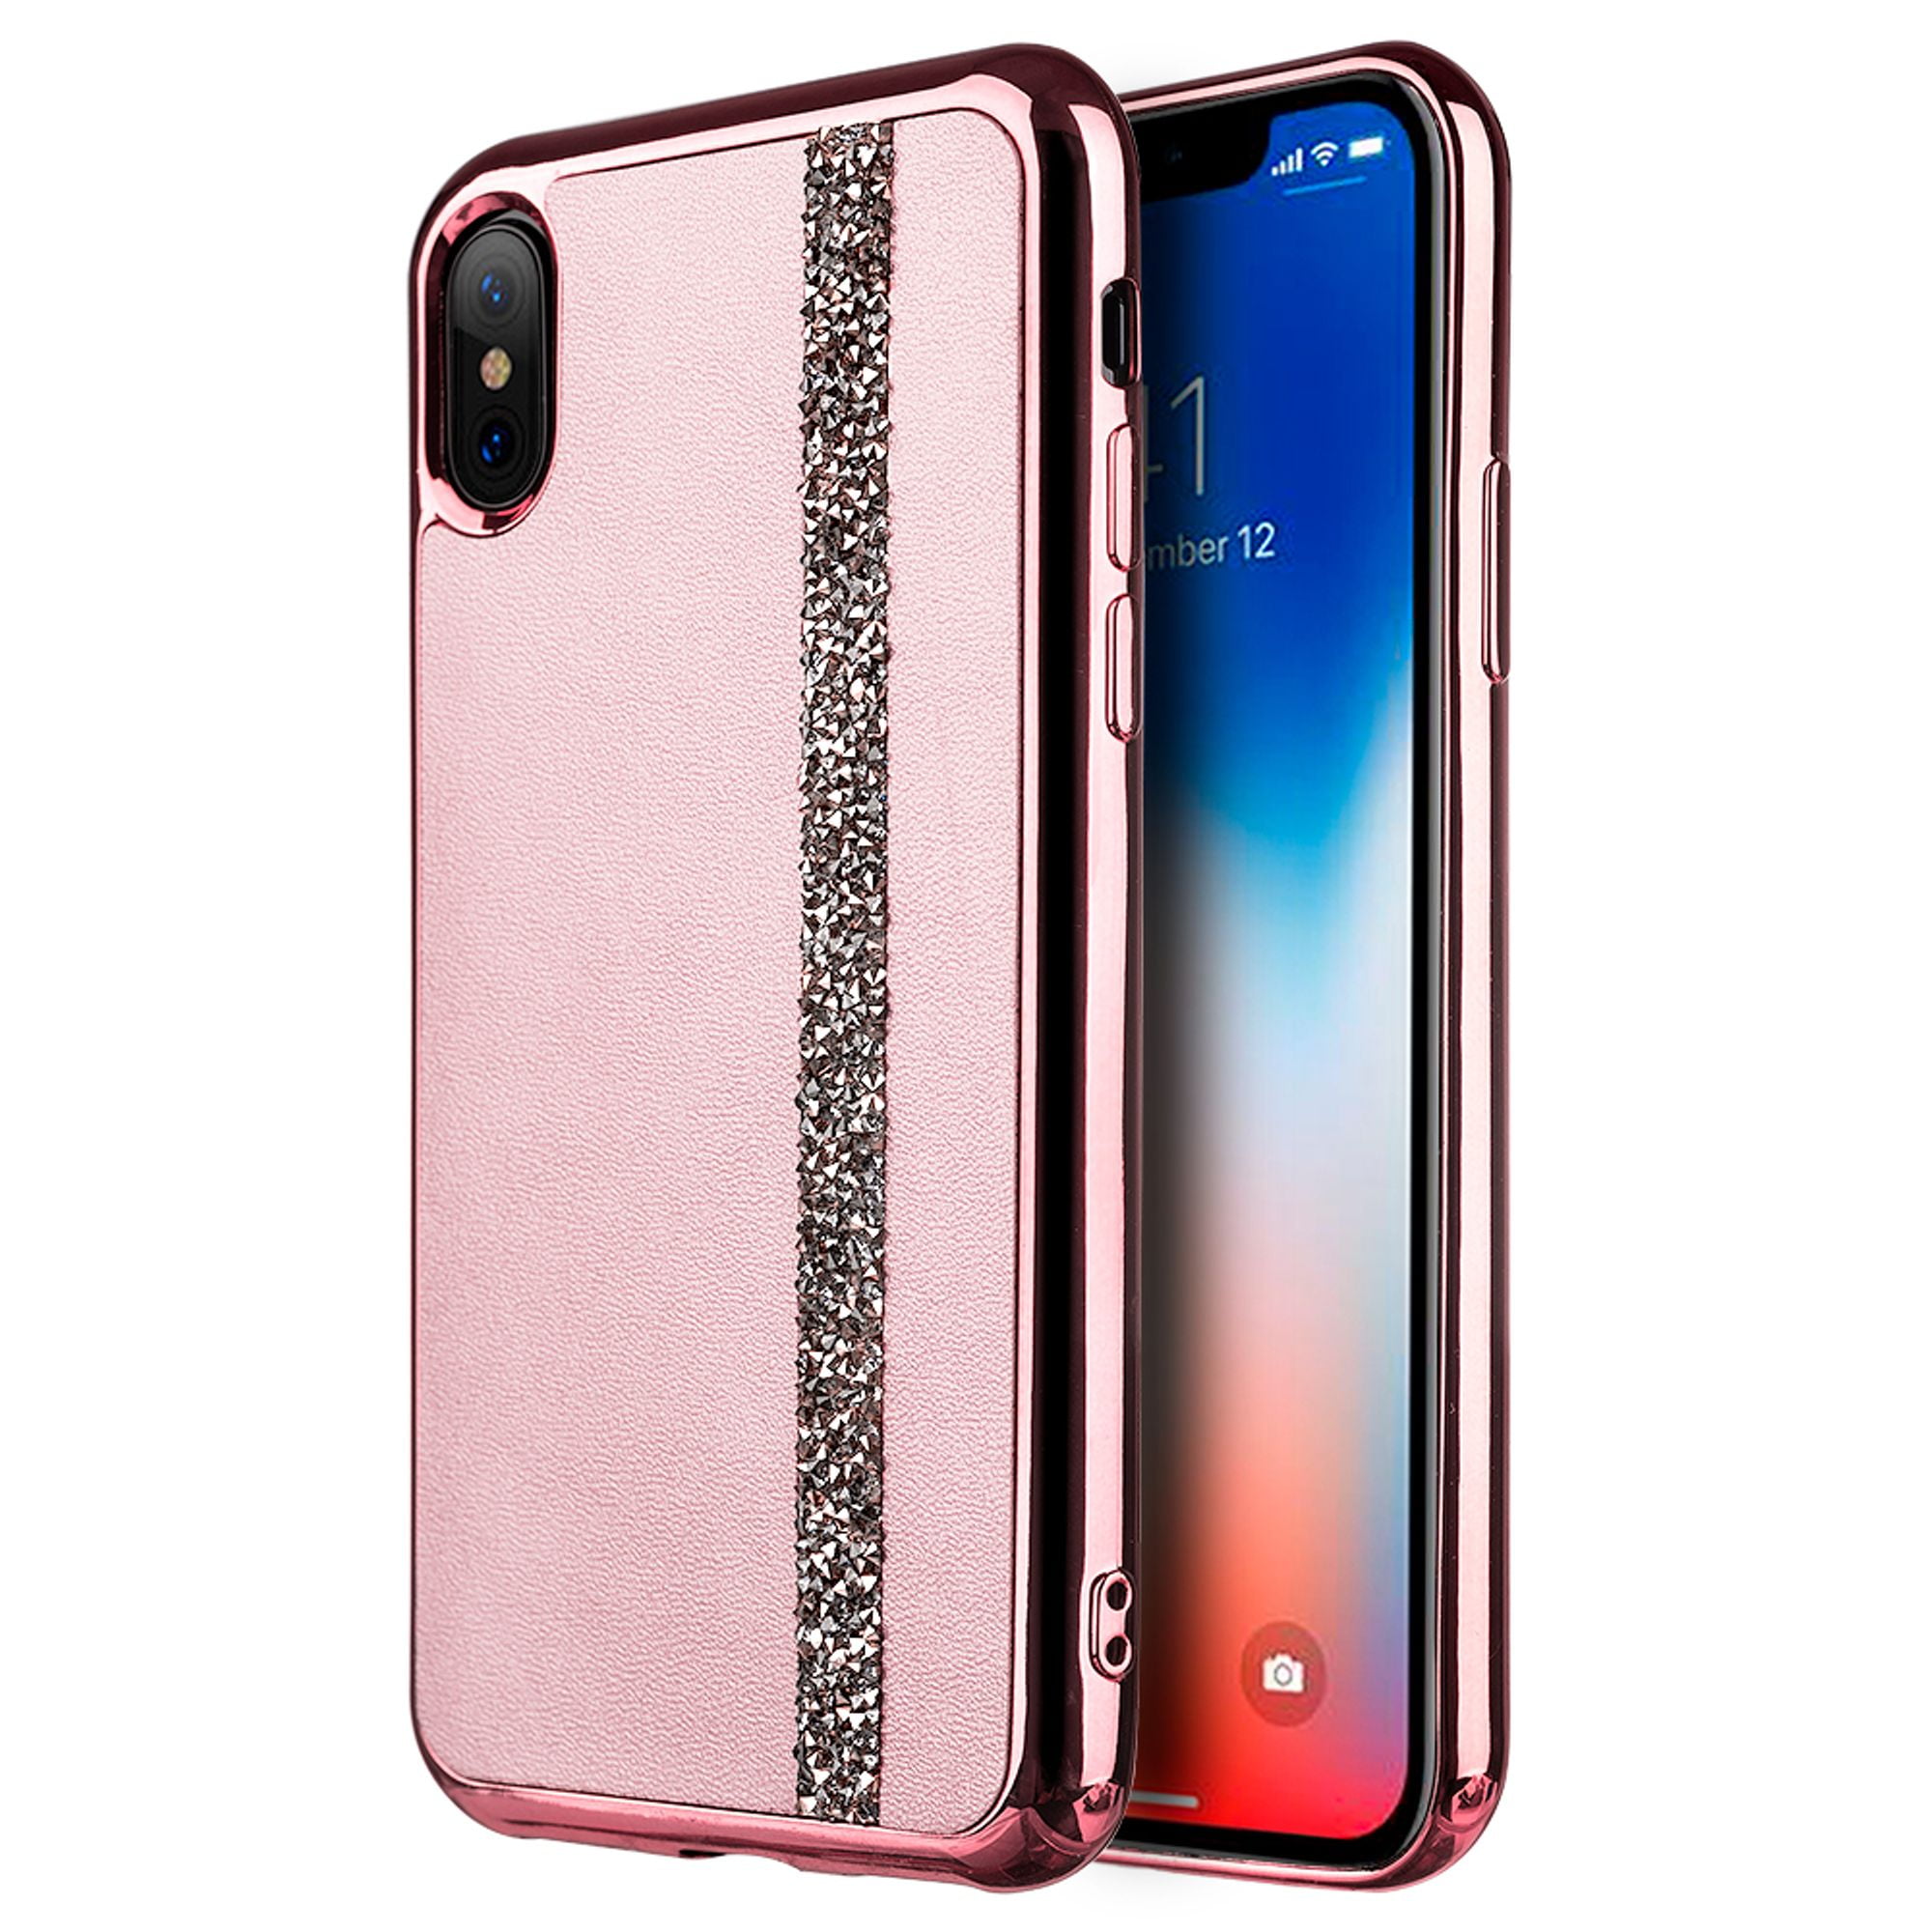 Apple iPhone X Case, by Insten Diamond Belt Collection Leatherette ...